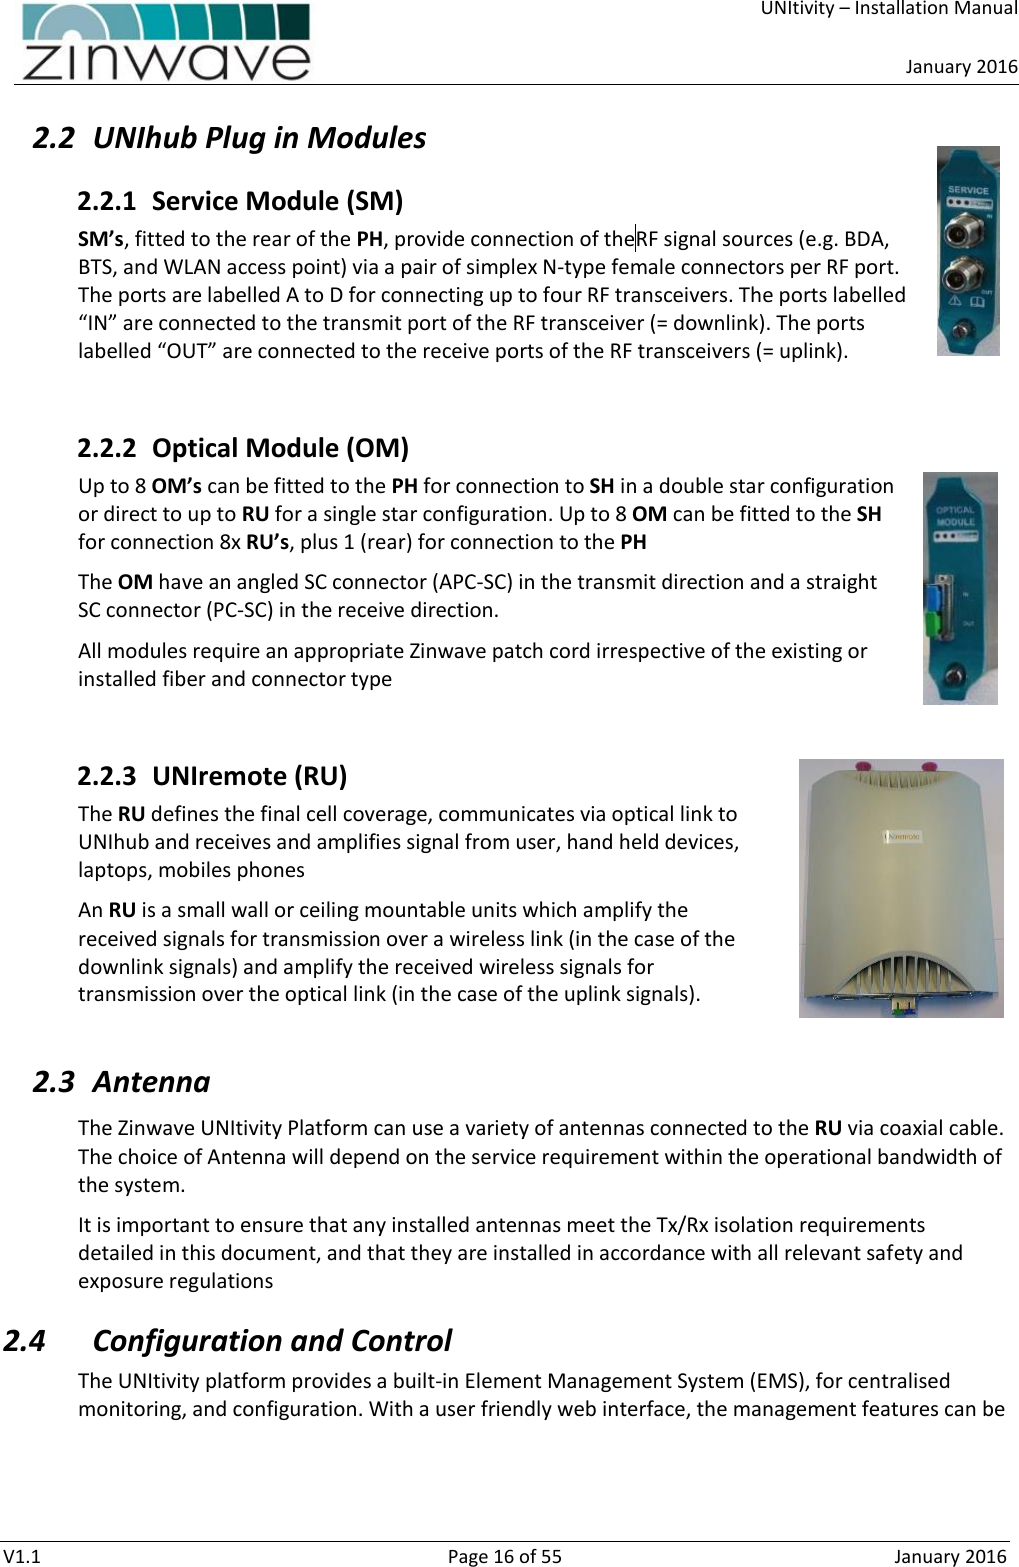     UNItivity – Installation Manual      January 2016  V1.1  Page 16 of 55  January 2016 2.2 UNIhub Plug in Modules 2.2.1 Service Module (SM) SM’s, fitted to the rear of the PH, provide connection of the RF signal sources (e.g. BDA, BTS, and WLAN access point) via a pair of simplex N-type female connectors per RF port. The ports are labelled A to D for connecting up to four RF transceivers. The ports labelled “IN” are connected to the transmit port of the RF transceiver (= downlink). The ports labelled “OUT” are connected to the receive ports of the RF transceivers (= uplink).   2.2.2 Optical Module (OM) Up to 8 OM’s can be fitted to the PH for connection to SH in a double star configuration or direct to up to RU for a single star configuration. Up to 8 OM can be fitted to the SH for connection 8x RU’s, plus 1 (rear) for connection to the PH The OM have an angled SC connector (APC-SC) in the transmit direction and a straight SC connector (PC-SC) in the receive direction. All modules require an appropriate Zinwave patch cord irrespective of the existing or installed fiber and connector type  2.2.3 UNIremote (RU) The RU defines the final cell coverage, communicates via optical link to UNIhub and receives and amplifies signal from user, hand held devices, laptops, mobiles phones An RU is a small wall or ceiling mountable units which amplify the received signals for transmission over a wireless link (in the case of the downlink signals) and amplify the received wireless signals for transmission over the optical link (in the case of the uplink signals).  2.3 Antenna The Zinwave UNItivity Platform can use a variety of antennas connected to the RU via coaxial cable. The choice of Antenna will depend on the service requirement within the operational bandwidth of the system.  It is important to ensure that any installed antennas meet the Tx/Rx isolation requirements detailed in this document, and that they are installed in accordance with all relevant safety and exposure regulations 2.4 Configuration and Control The UNItivity platform provides a built-in Element Management System (EMS), for centralised monitoring, and configuration. With a user friendly web interface, the management features can be 